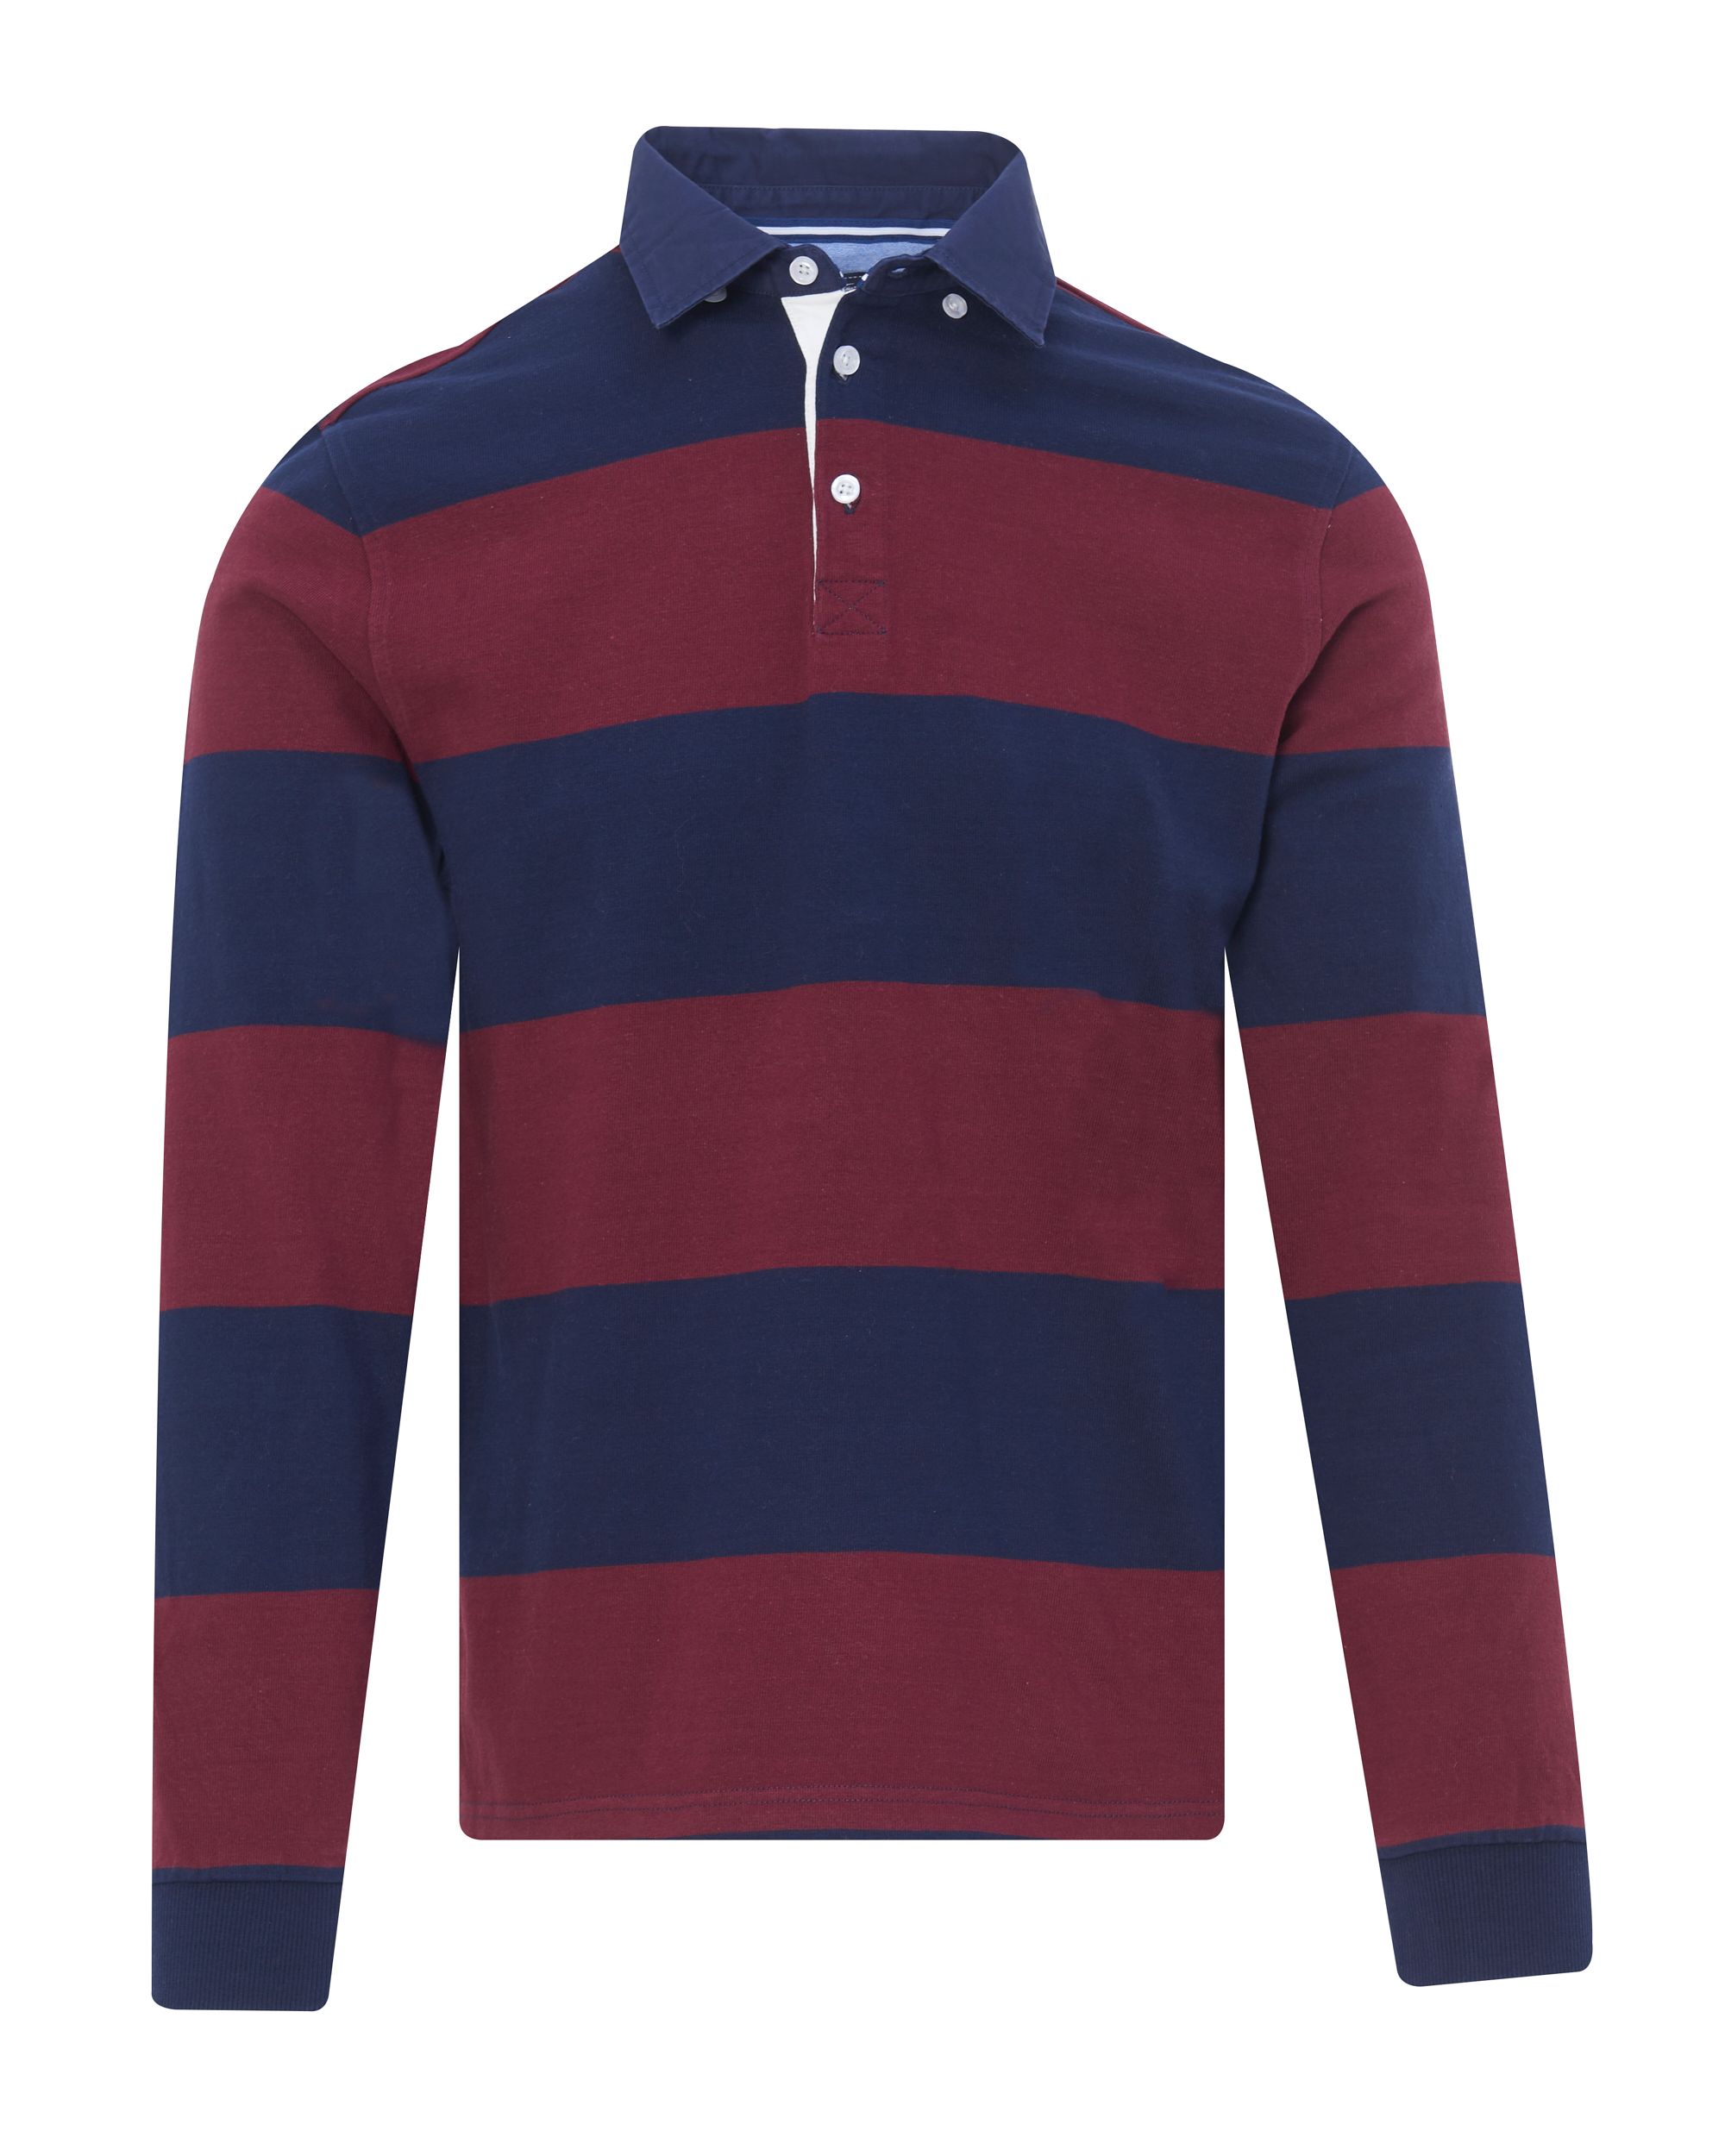 Campbell Classic Polo LM Bordeaux streep 084529-003-L